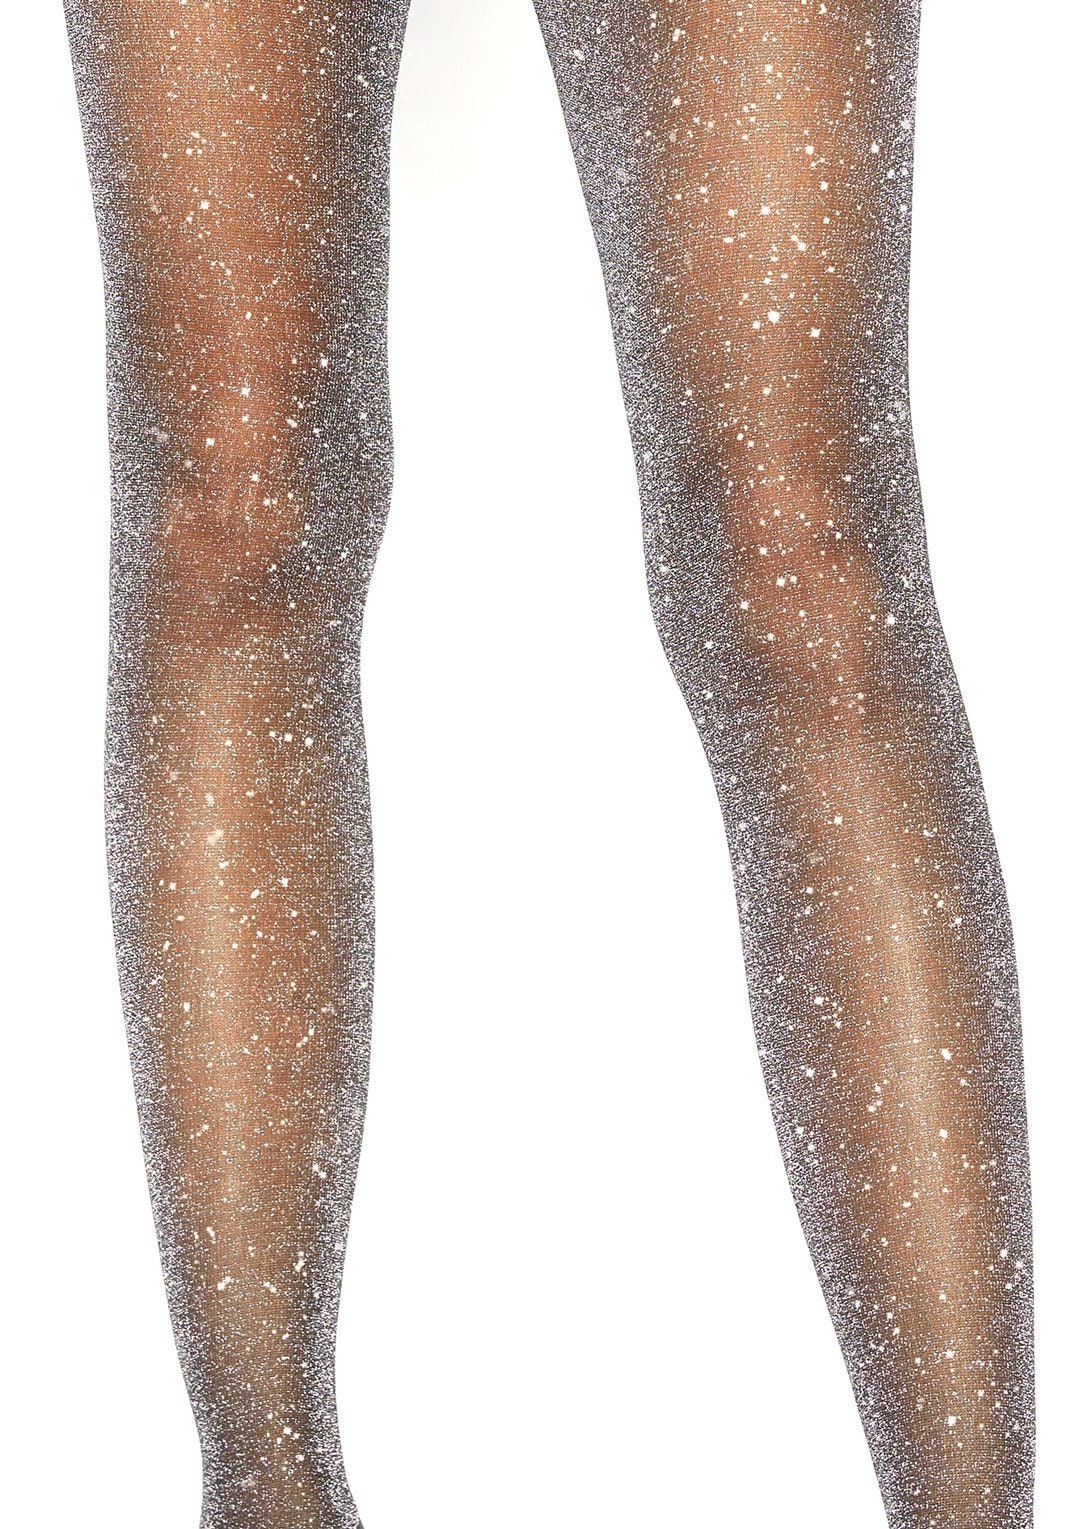 GLITTER SHIMMER TIGHTS, Black With Silver Sparkle, Panyhose